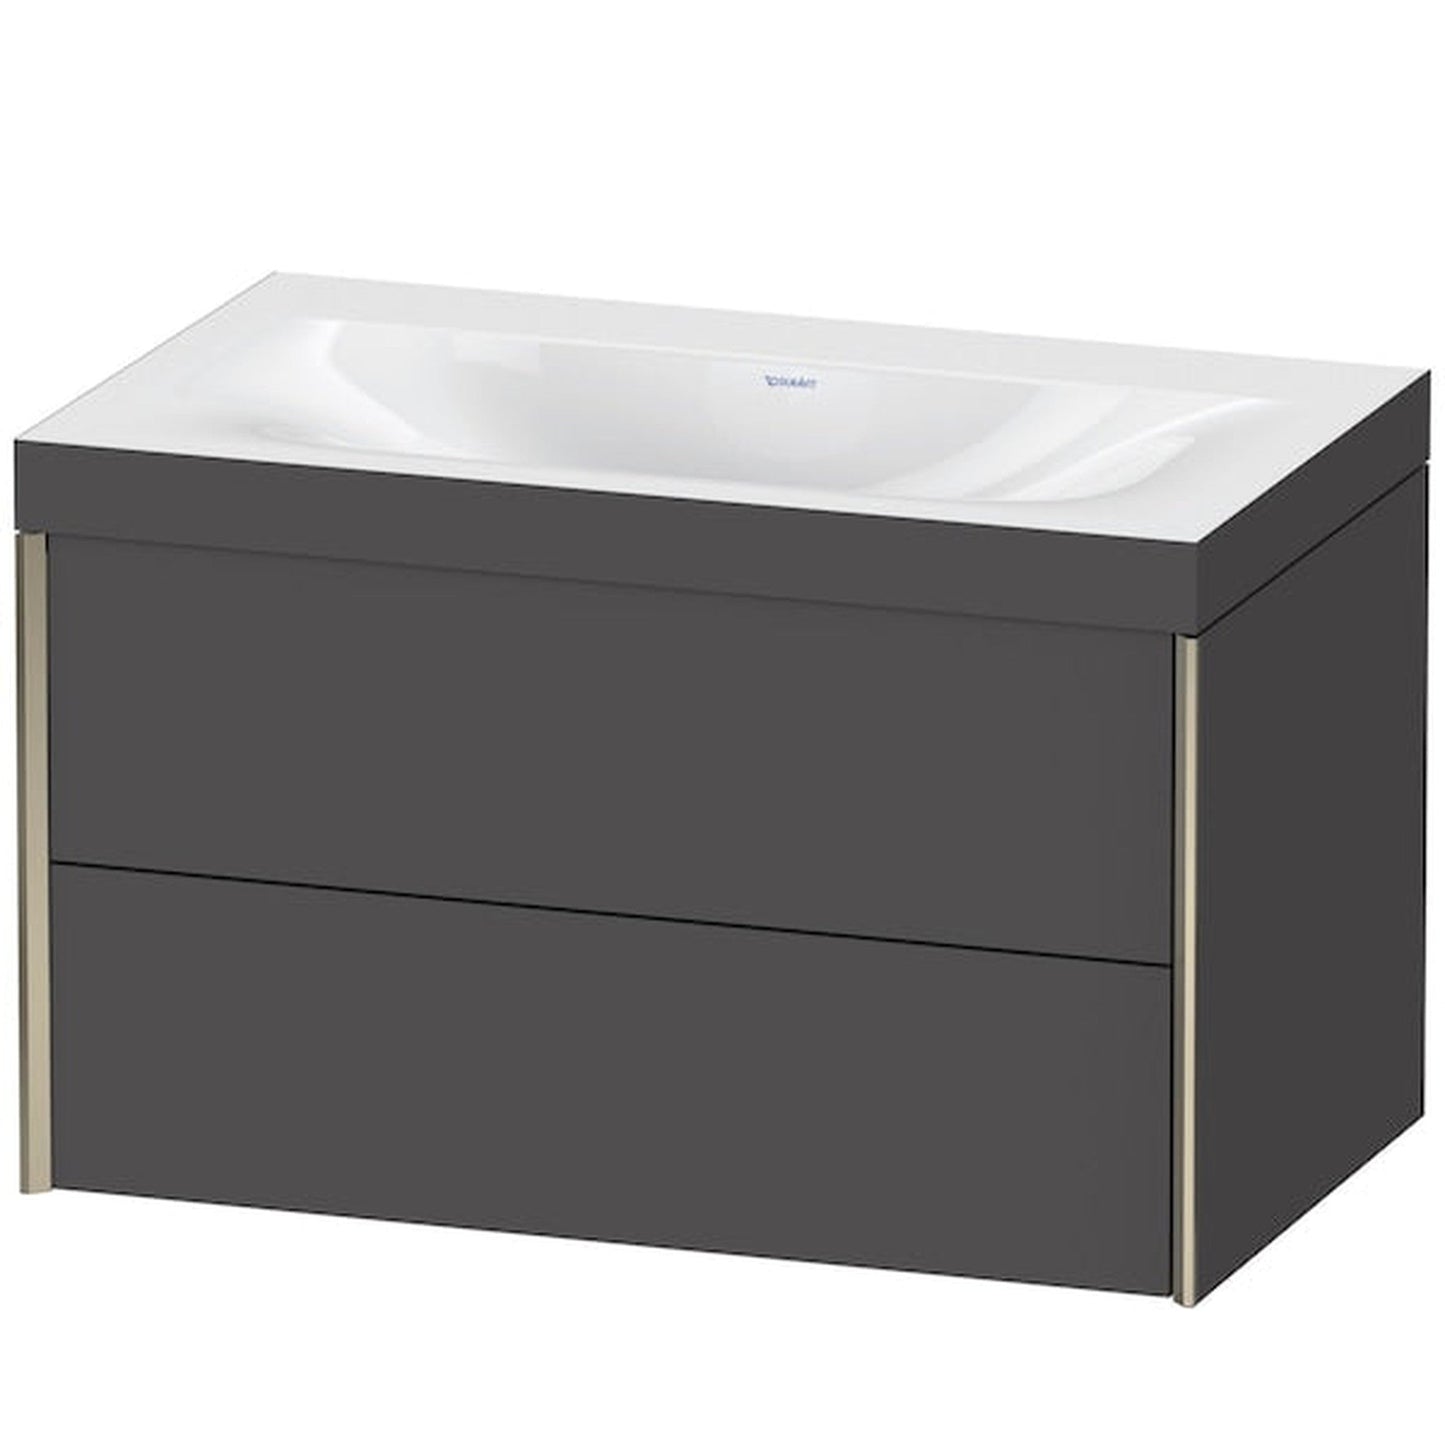 Duravit Xviu 31" x 20" x 19" Two Drawer C-Bonded Wall-Mount Vanity Kit Without Tap Hole, Graphite (XV4615NB149C)